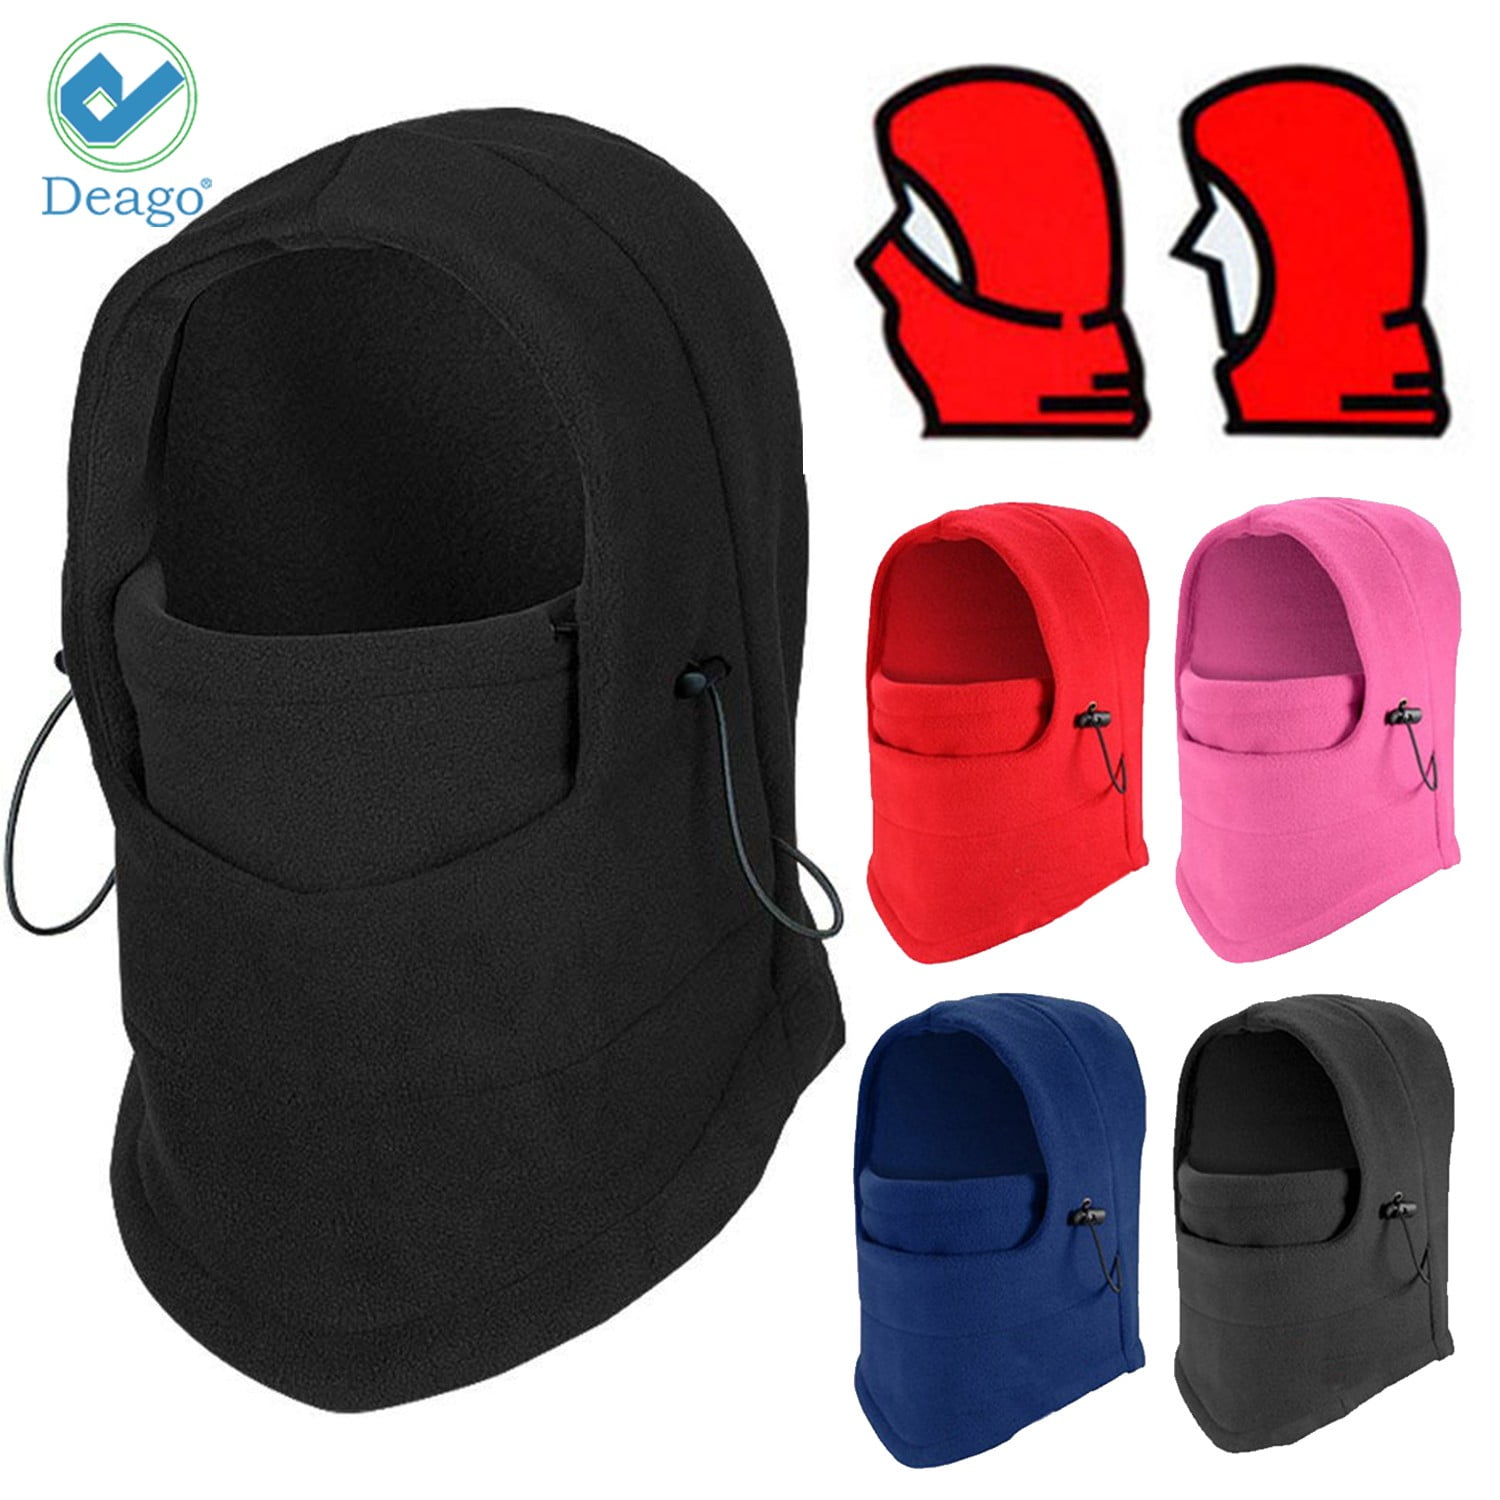 Winter Outdoor Fleece Warm Red Cycling Ski Breathable Half Face Mask US Seller 